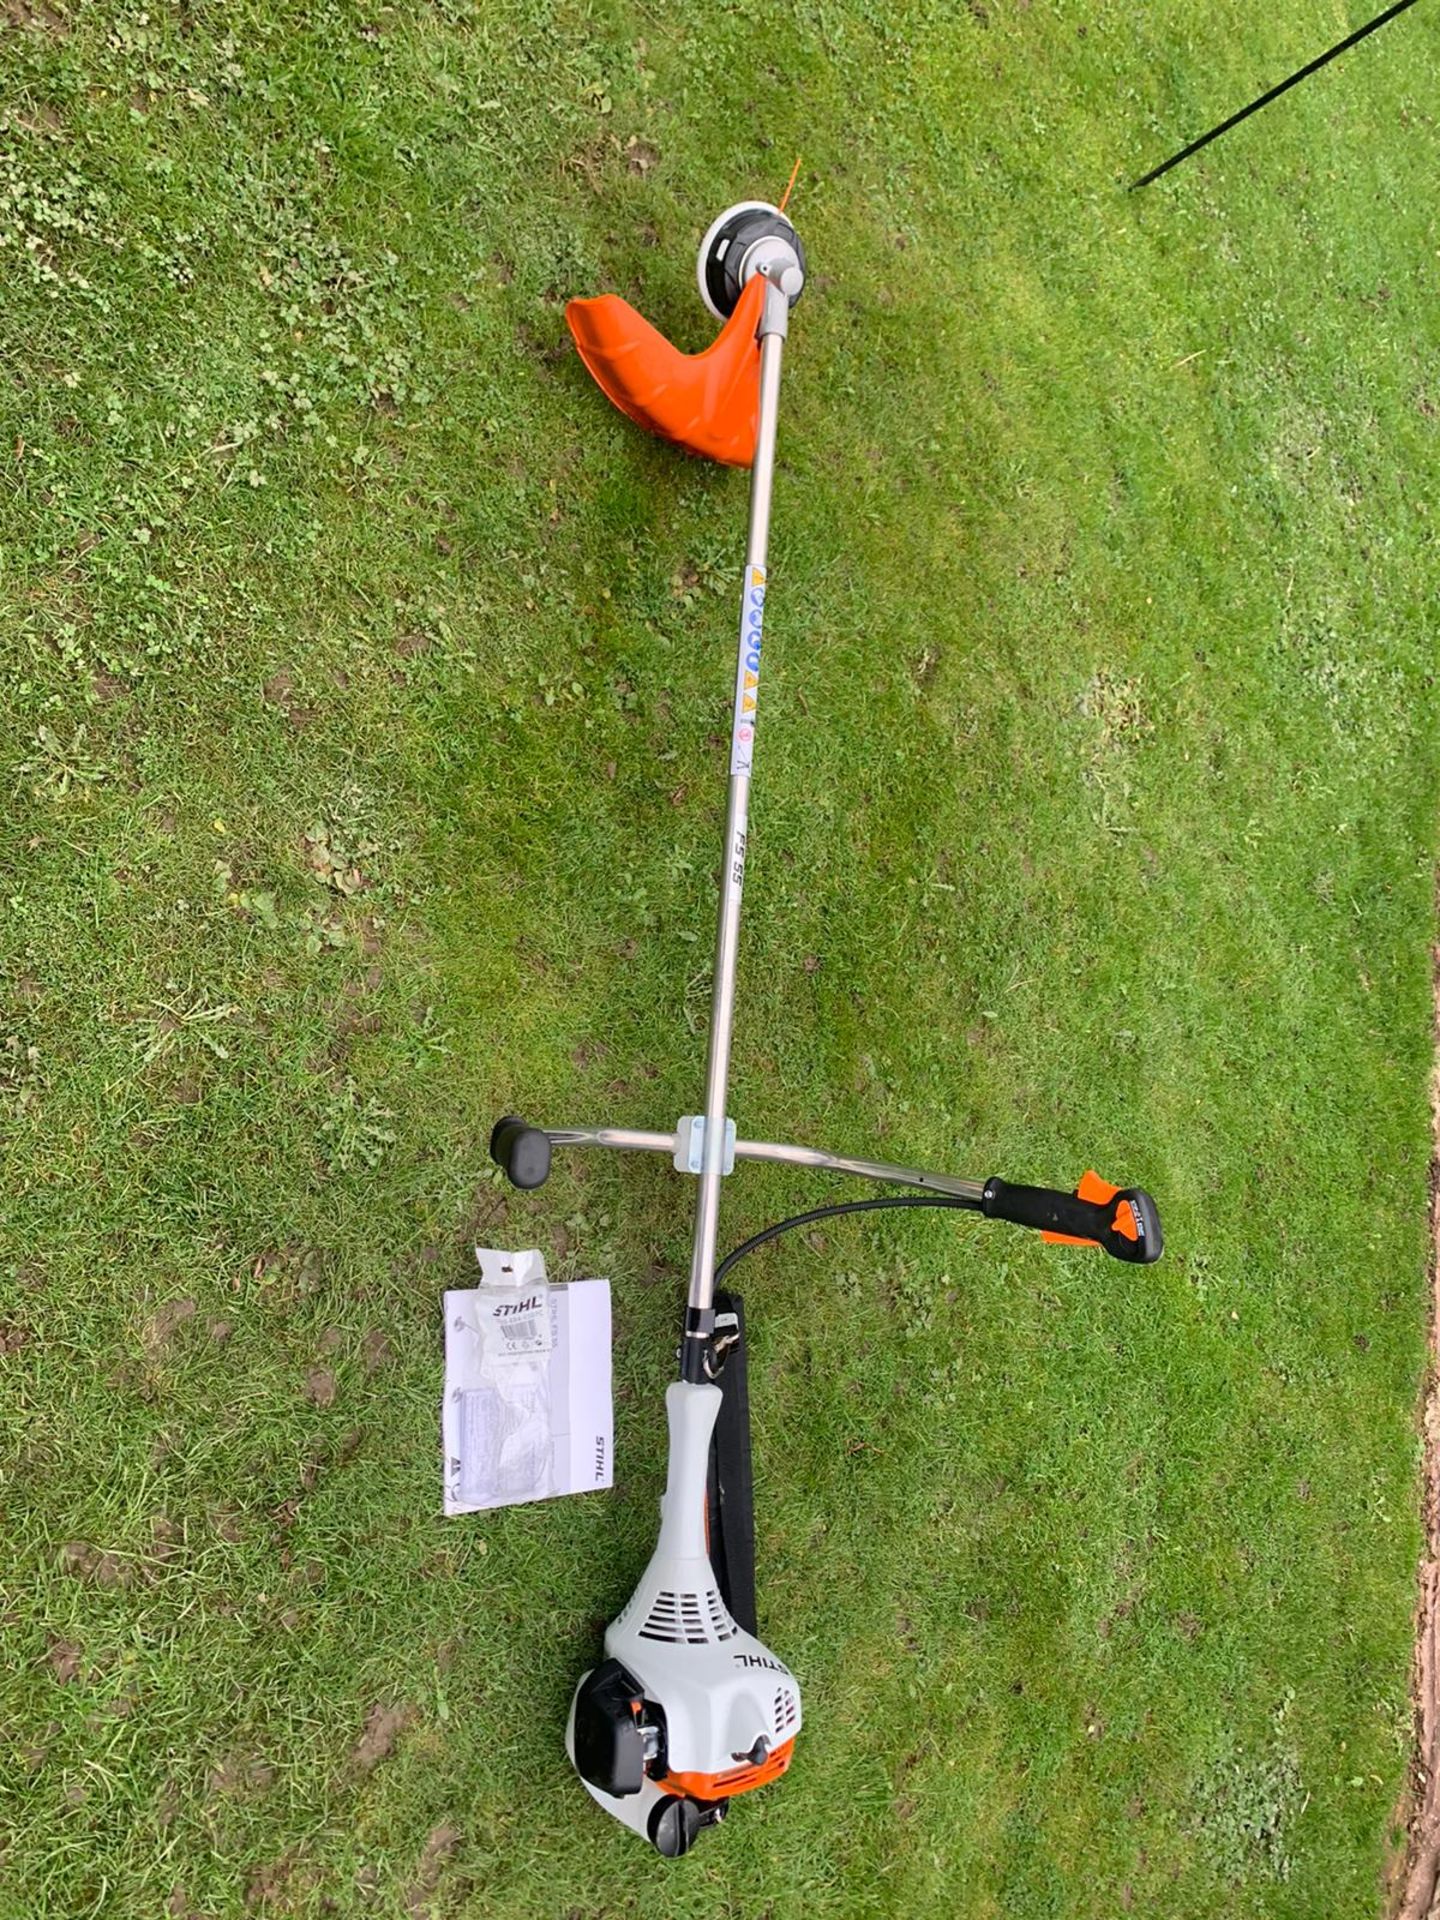 BRAND NEW AND UNUSED STIHL FS55 STRIMMER, C/W MANUAL AND GOGGLES *NO VAT* - Image 4 of 4